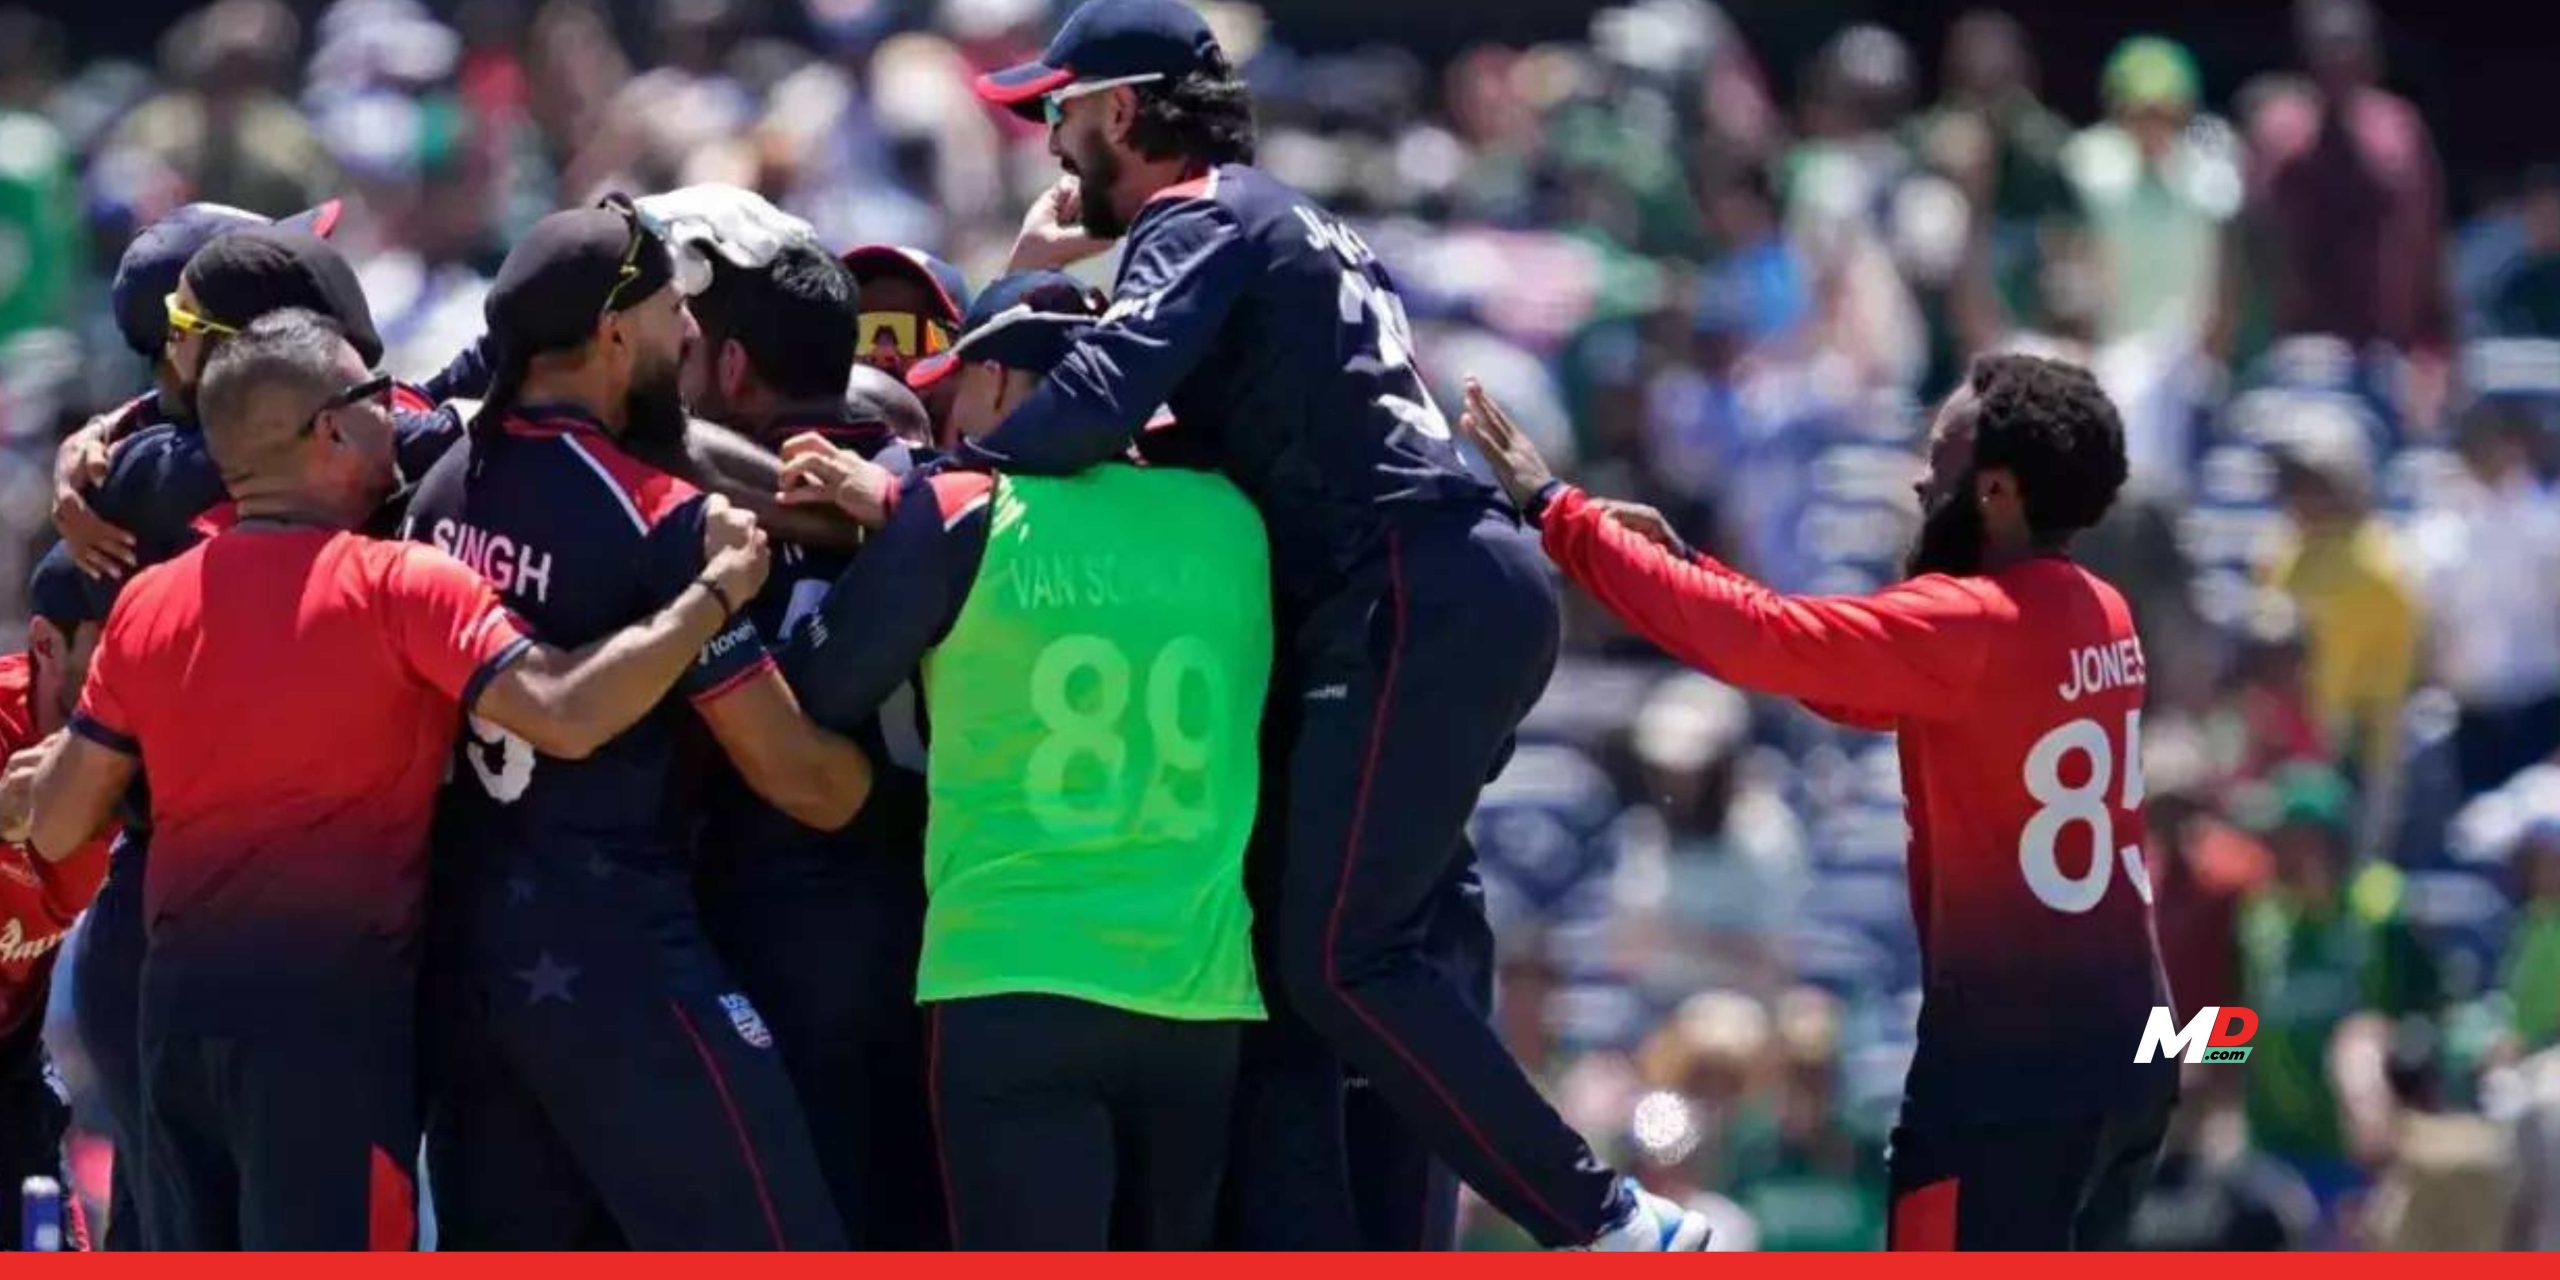 USA pulls off stunning upset, defeats Pakistan in thrilling T20 World Cup Super Over showdown